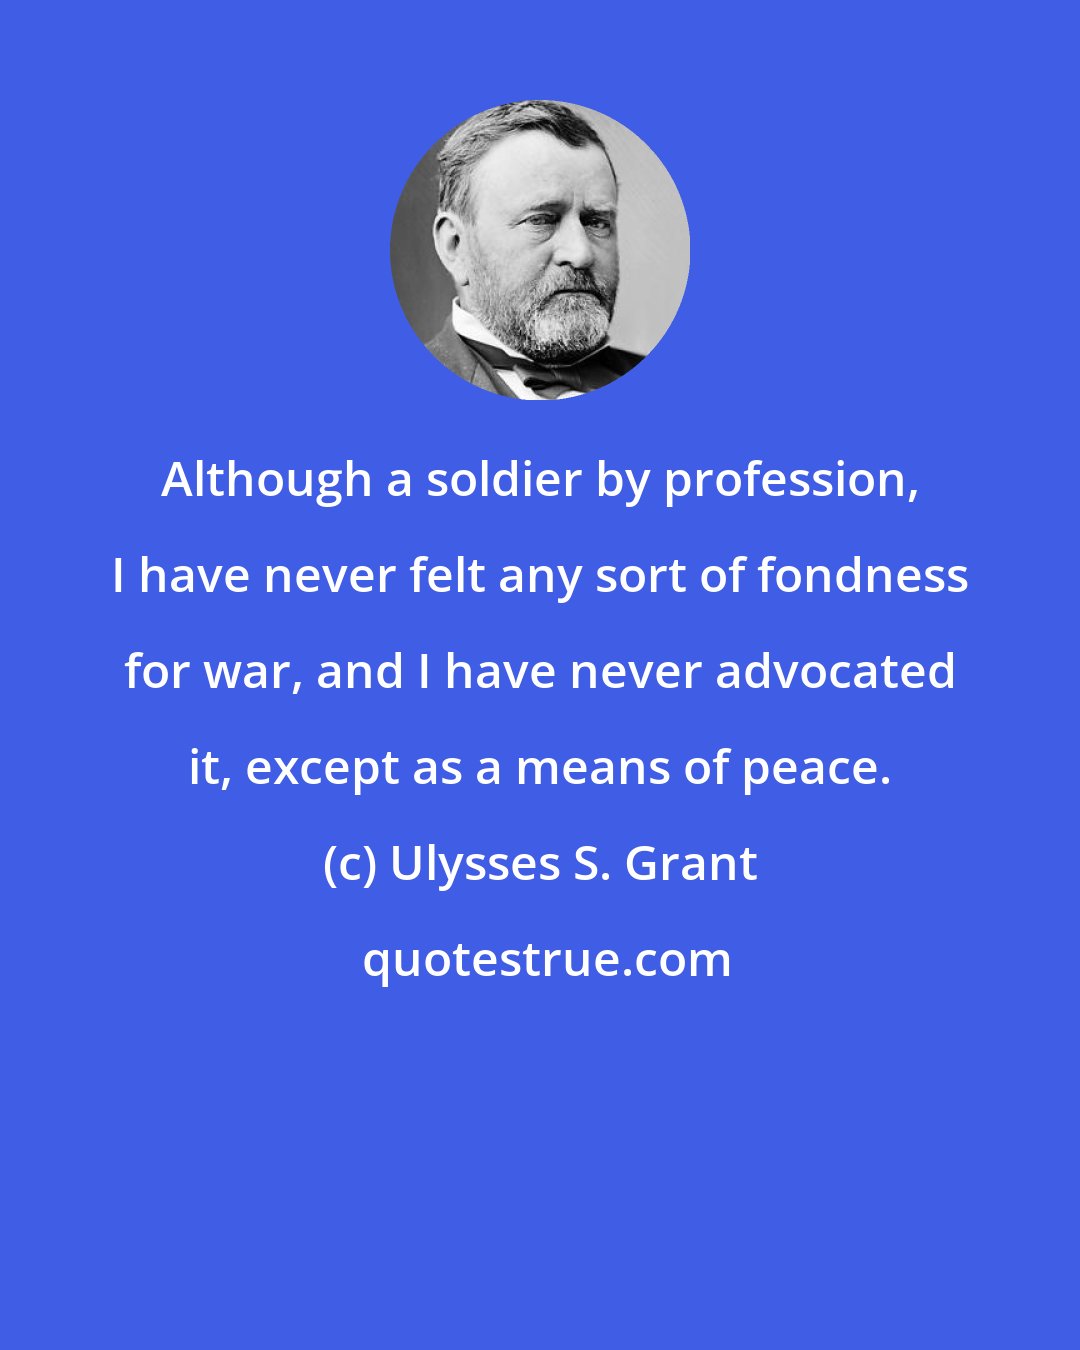 Ulysses S. Grant: Although a soldier by profession, I have never felt any sort of fondness for war, and I have never advocated it, except as a means of peace.